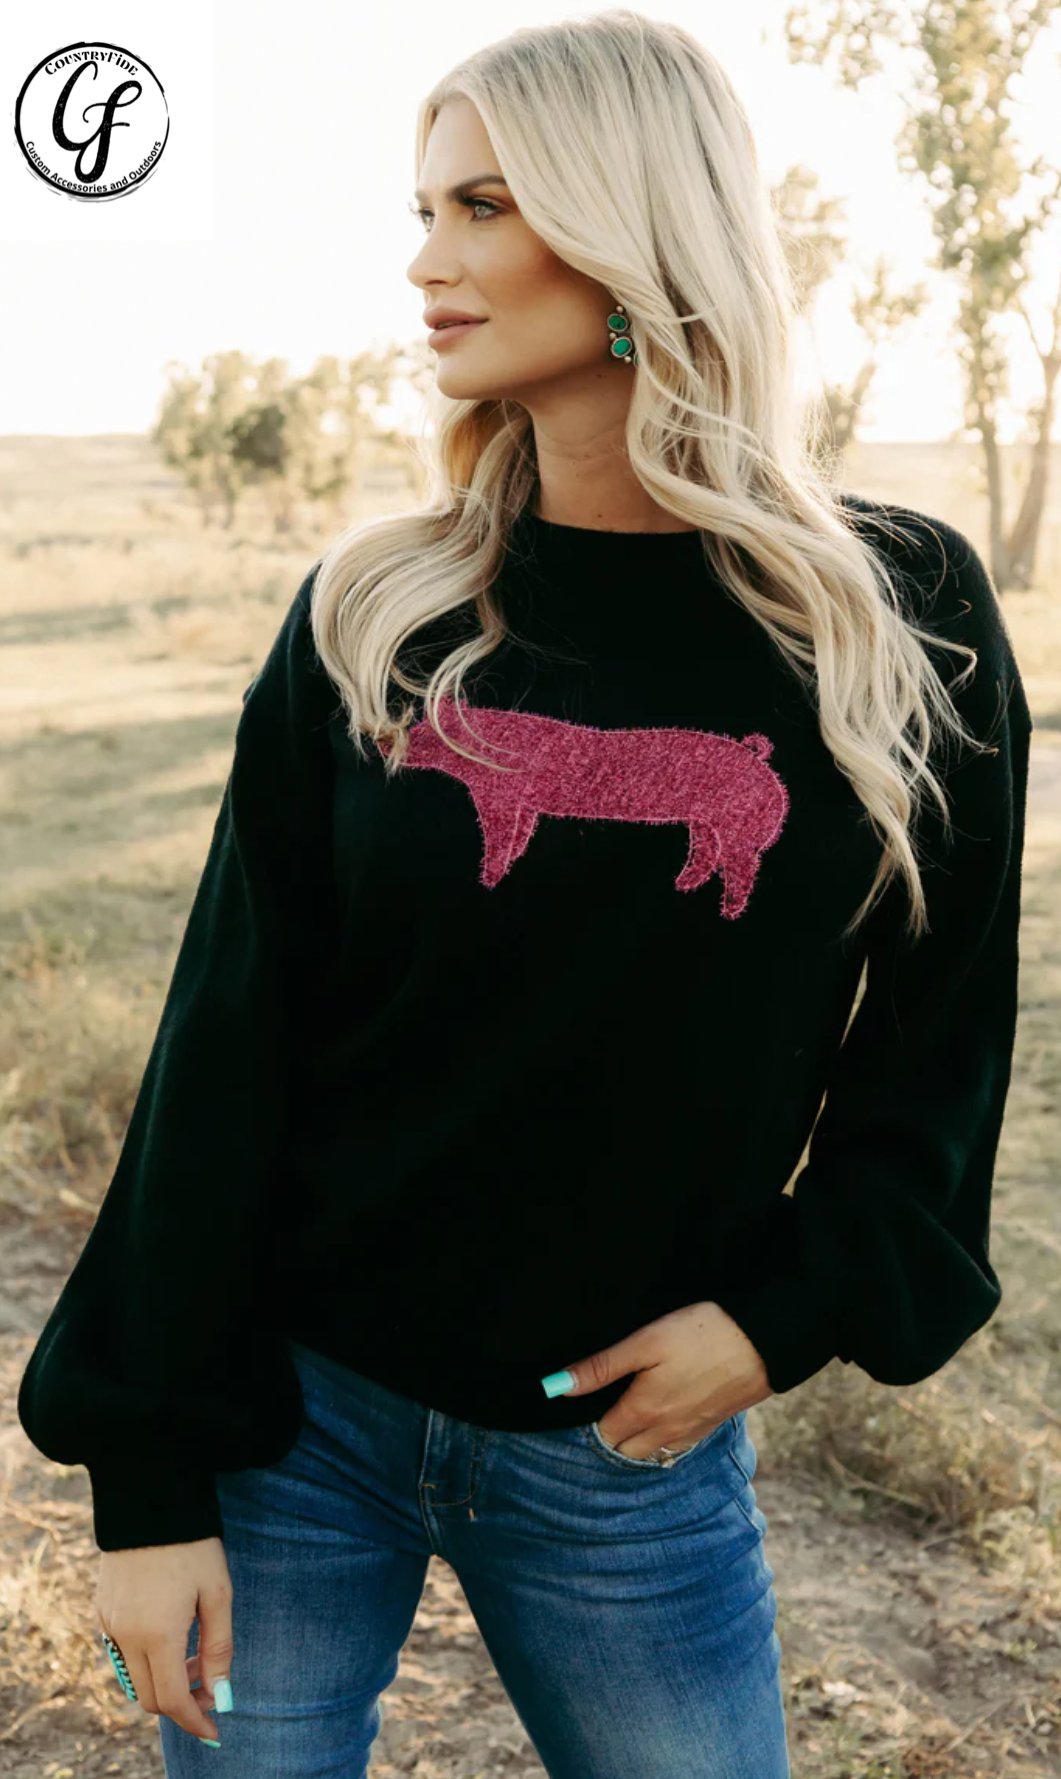 QUEEN OF STOCKSHOW SWEATER - CountryFide Custom Accessories and Outdoors